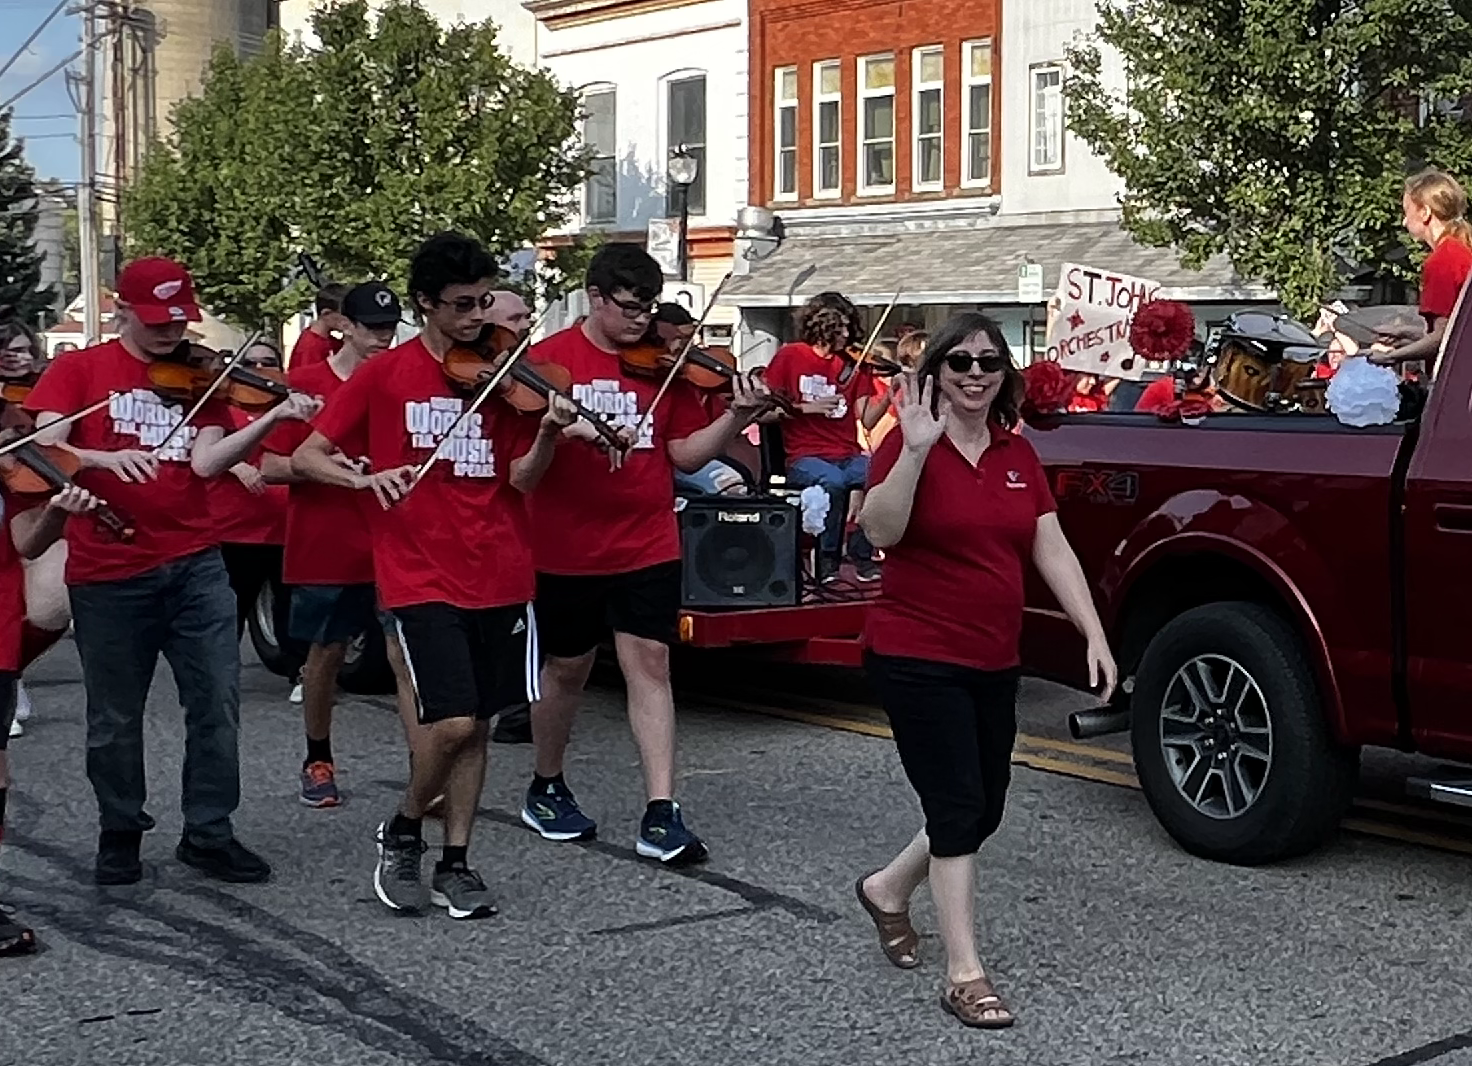 The High School Orchestra is marching in the parade for homecoming 2022.